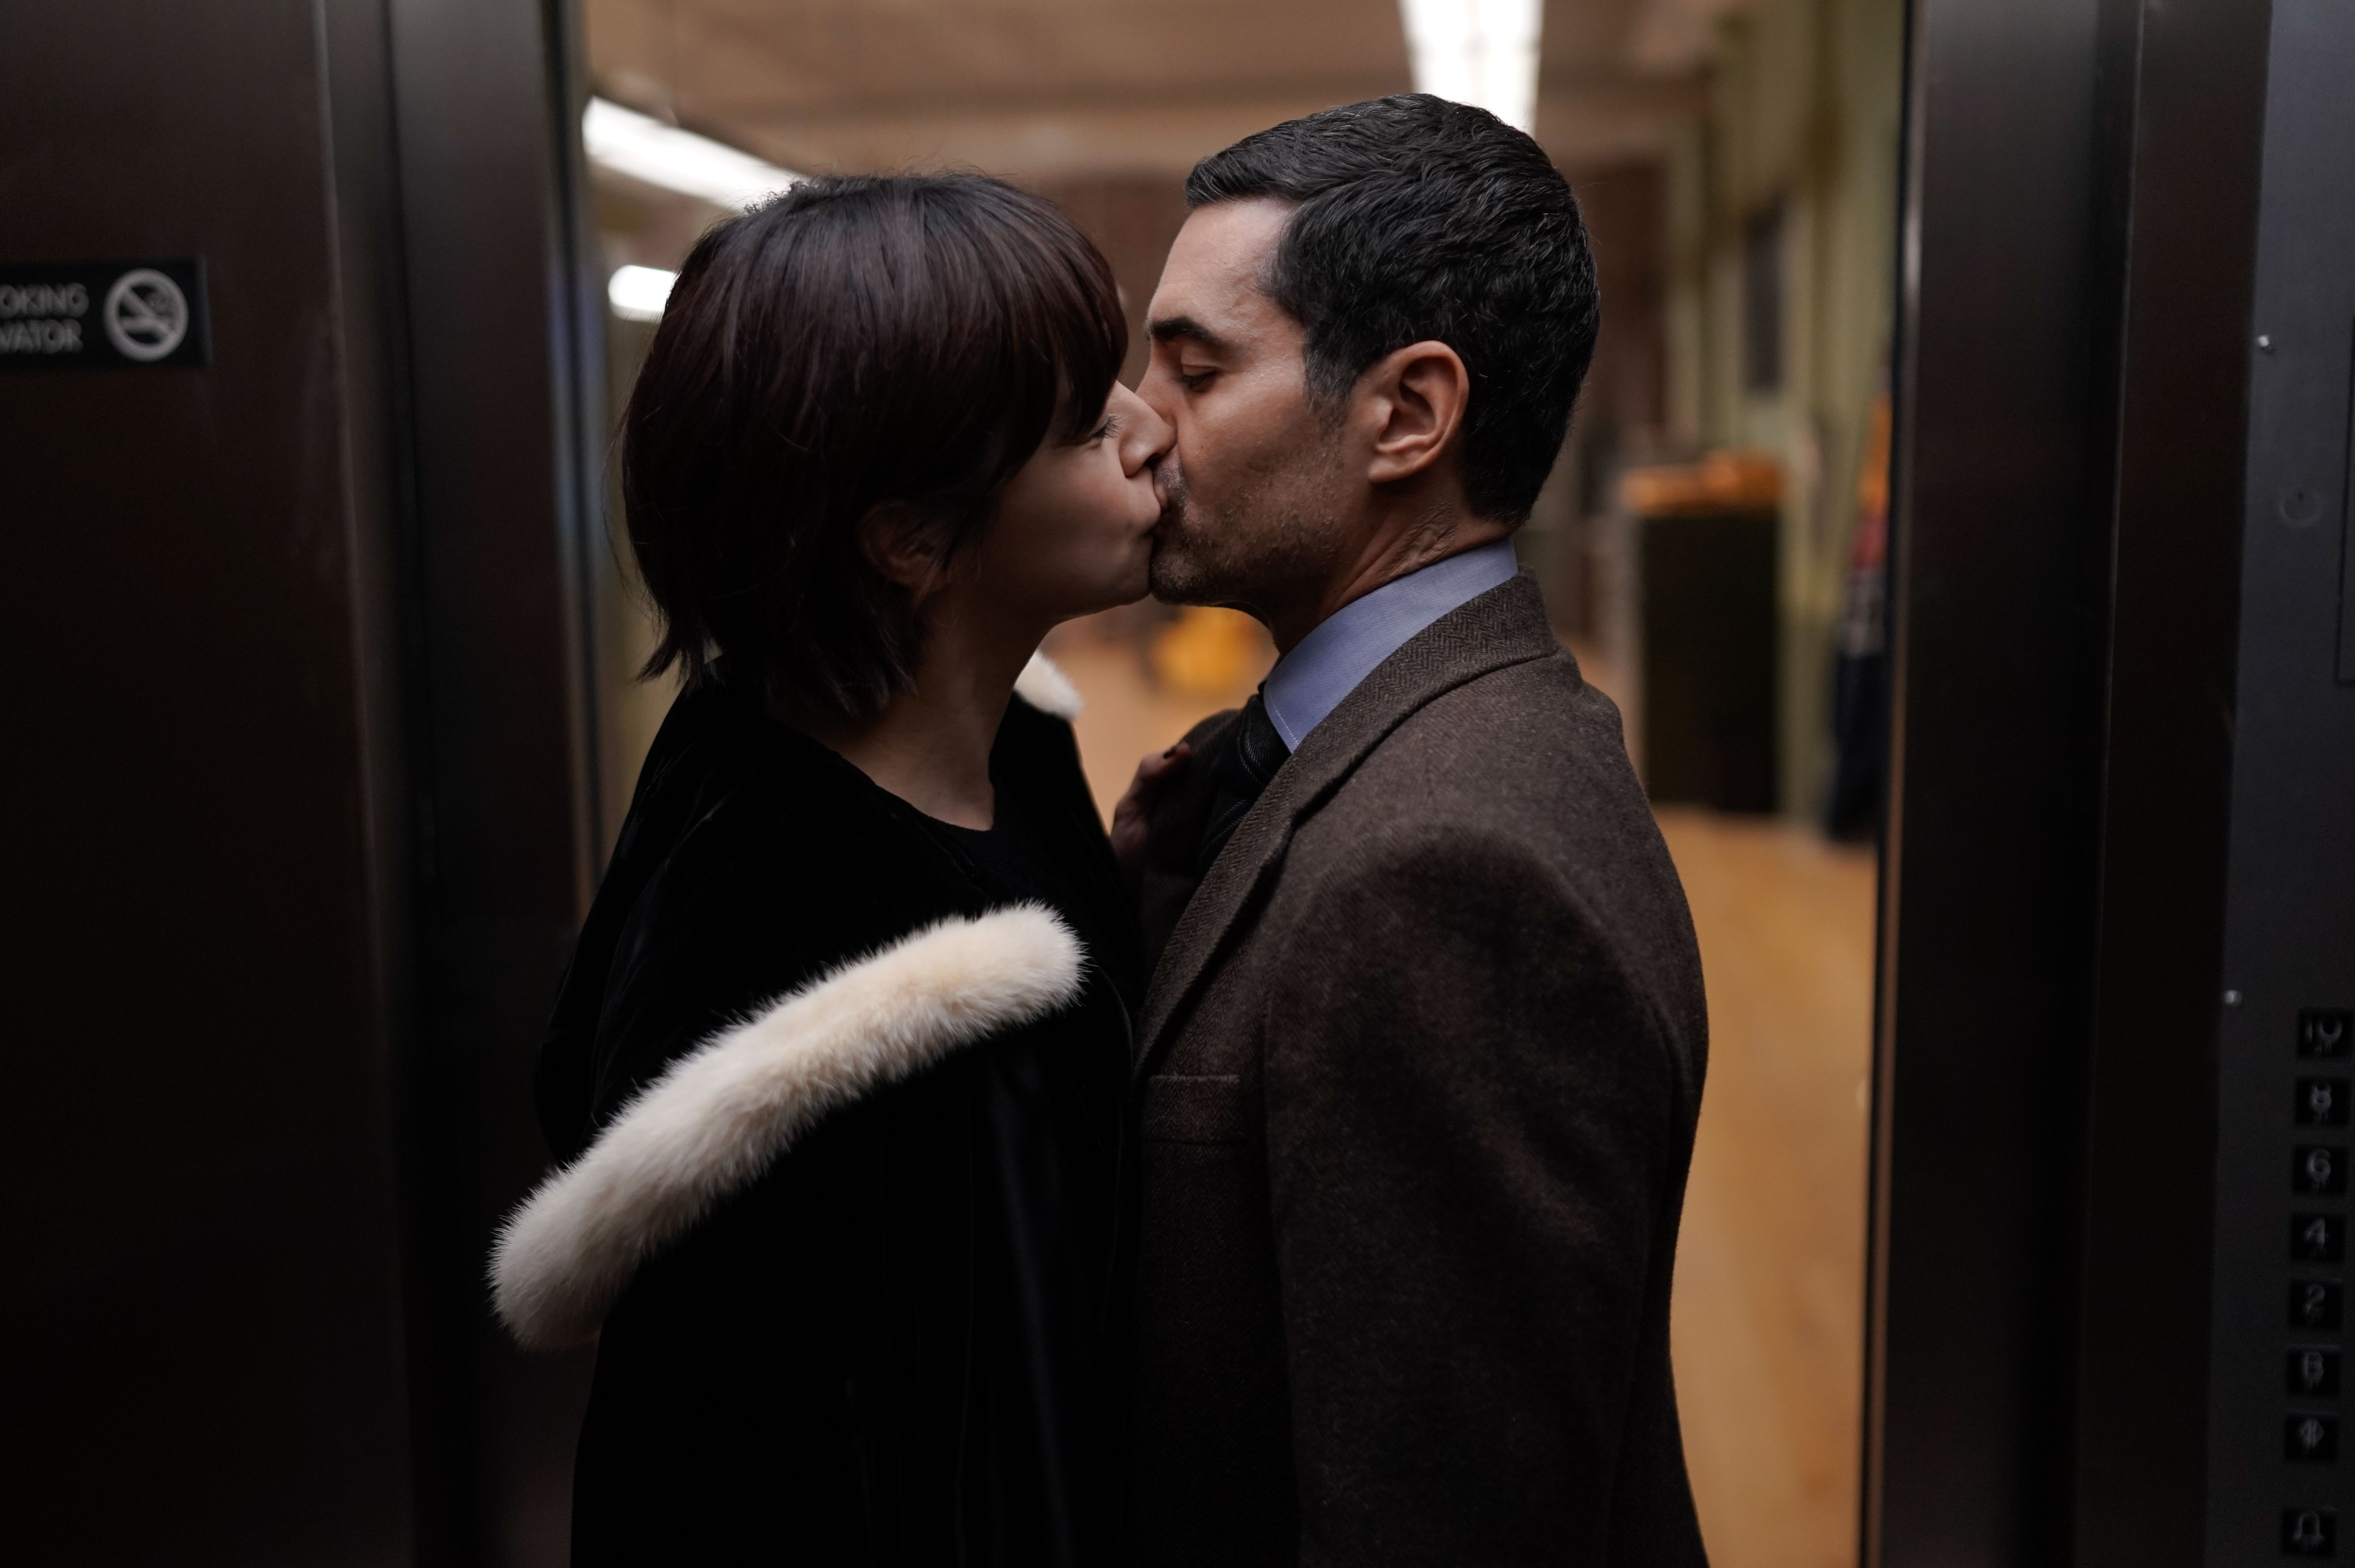 Julia Chan as Ava Green and Ramón Rodríguez as Will Trent kiss in 'Will Trent' Season 1 Episode 5. Ava wears a black coat with a white fur-lined hood. Will wears a dark brown three-piece suit.